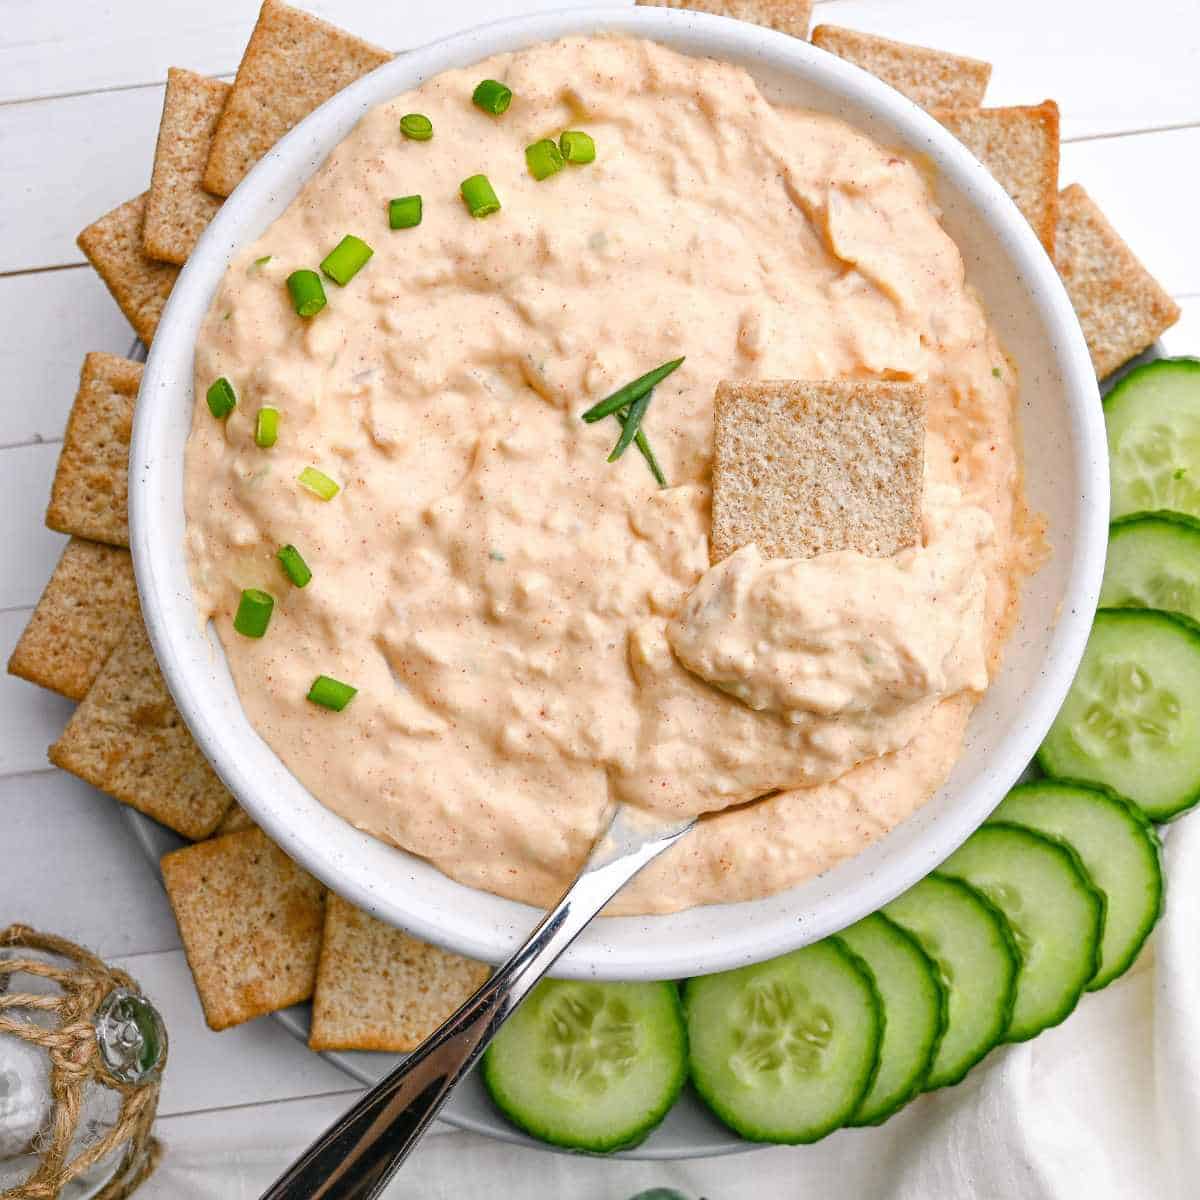 baked clam dip with crackers and cucumbers